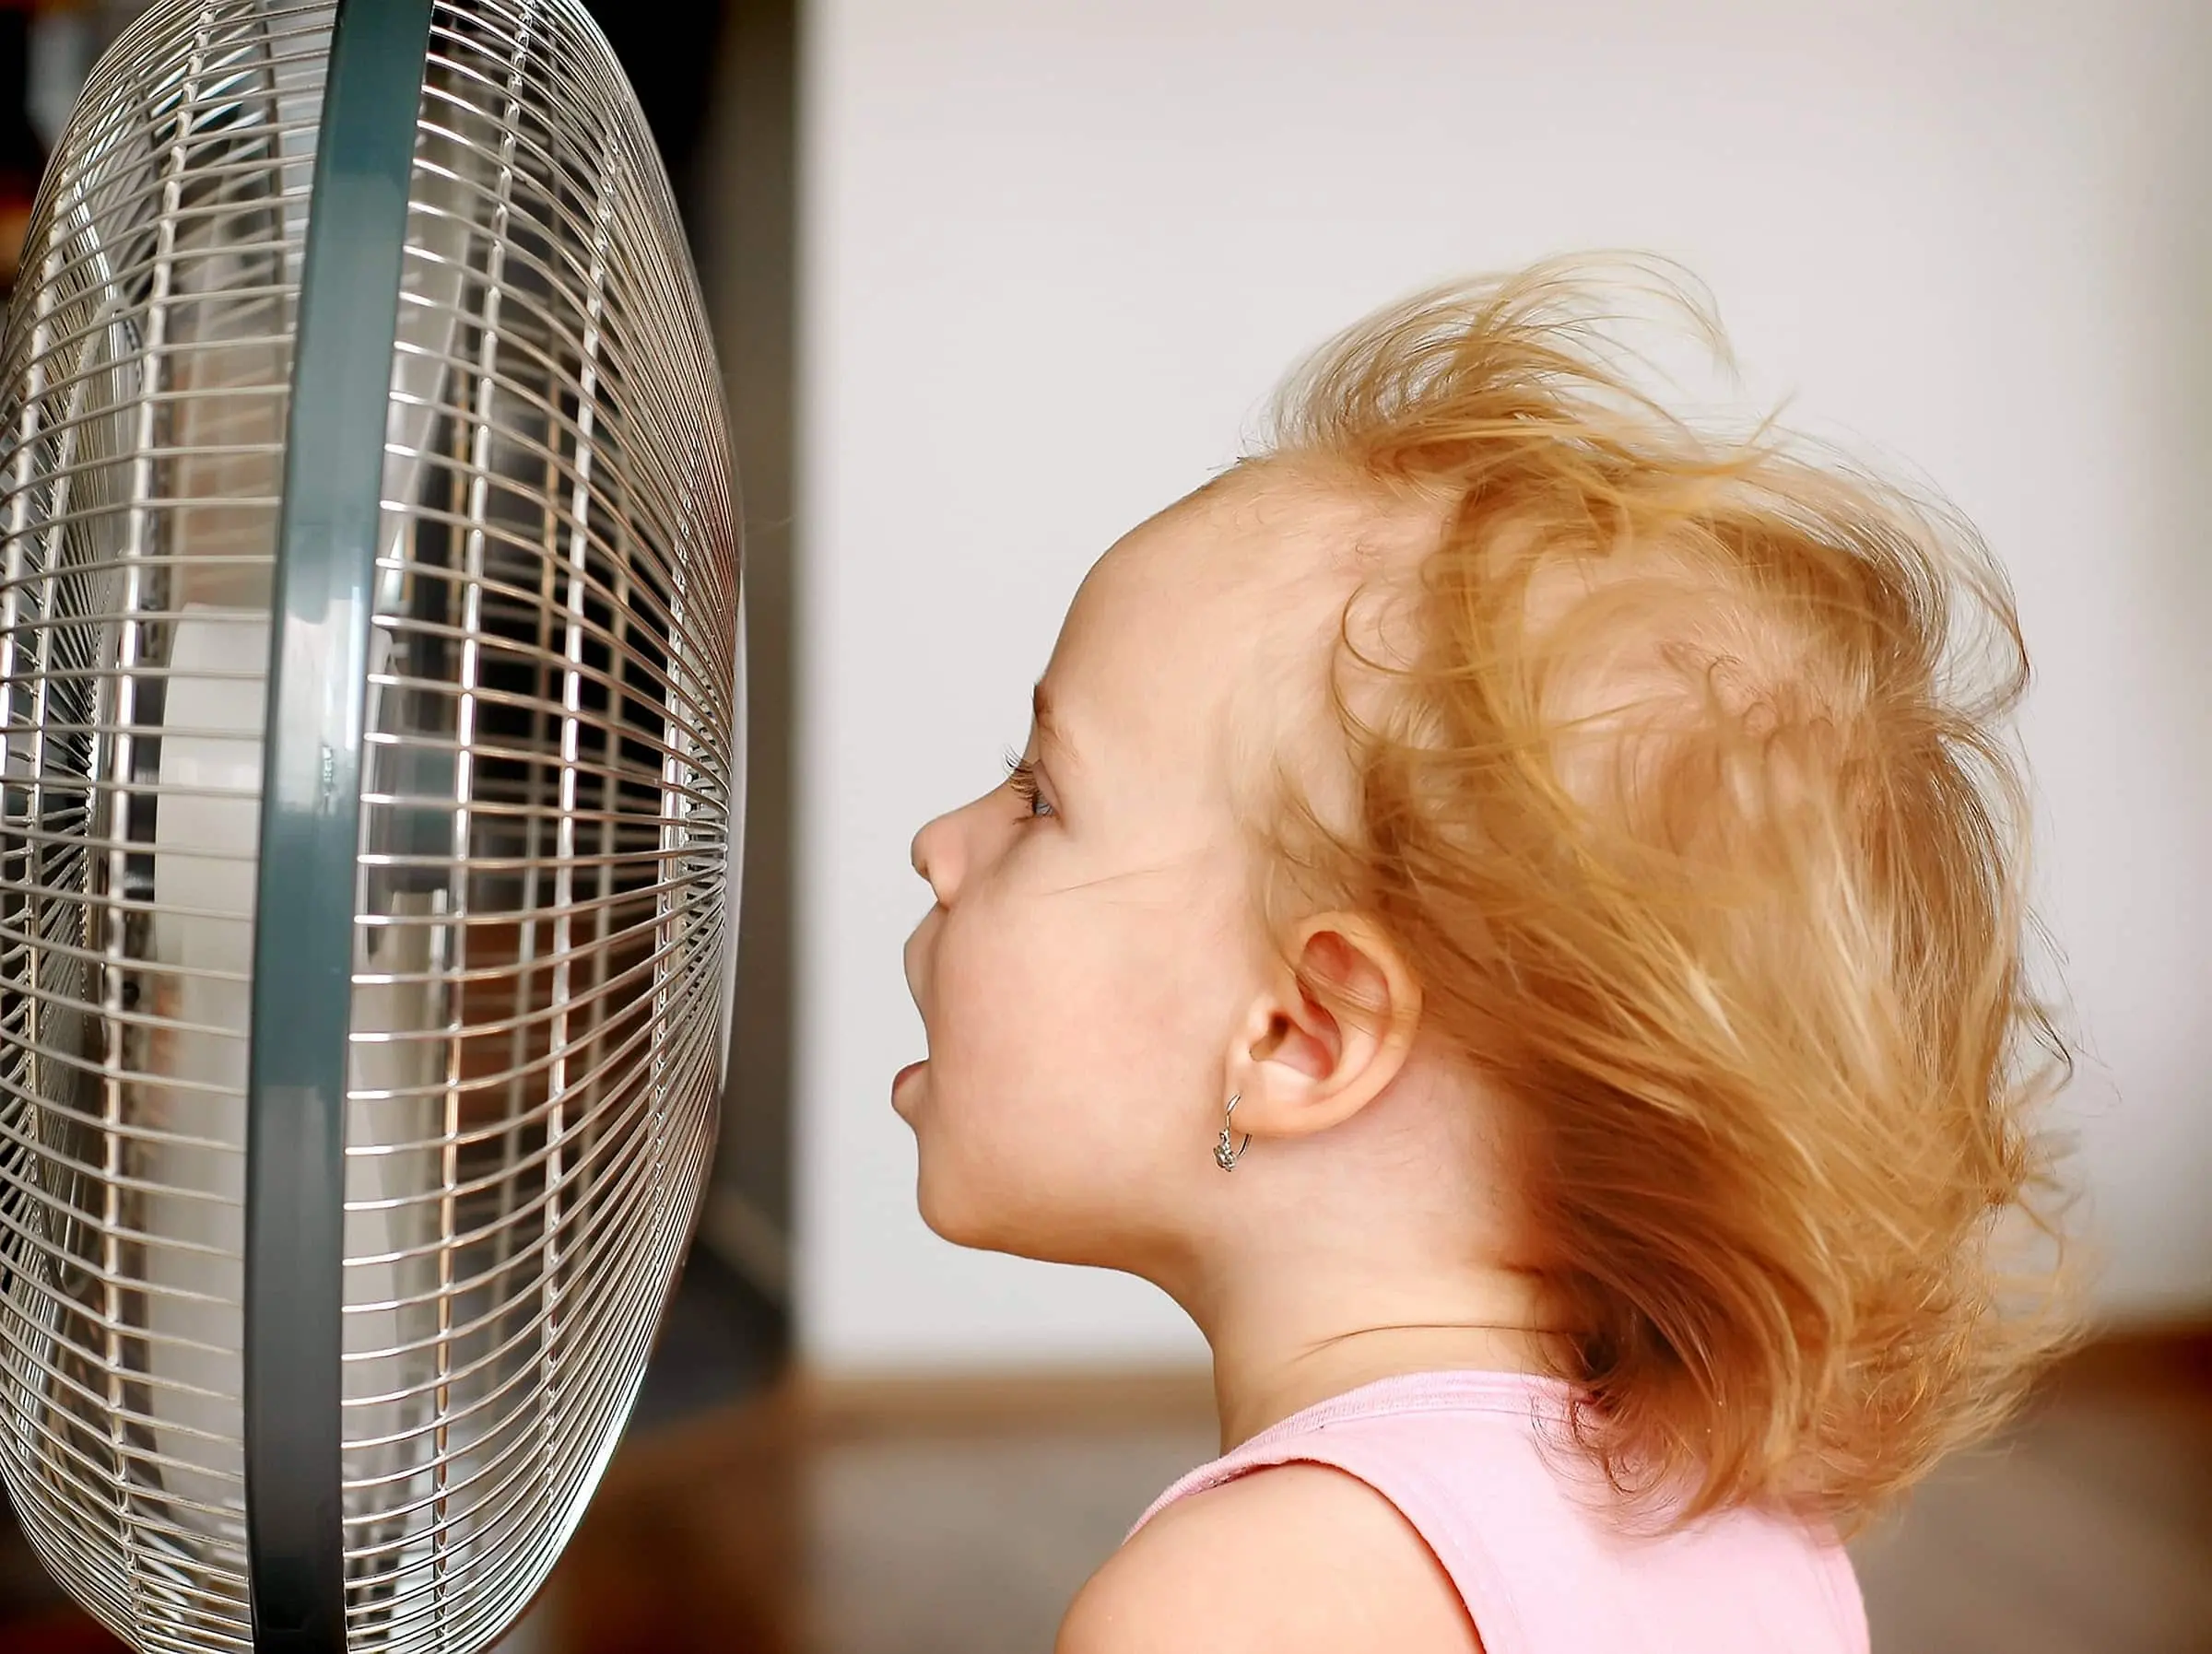 How To Keep Your Home Cool Without Air Conditioning- Air Express